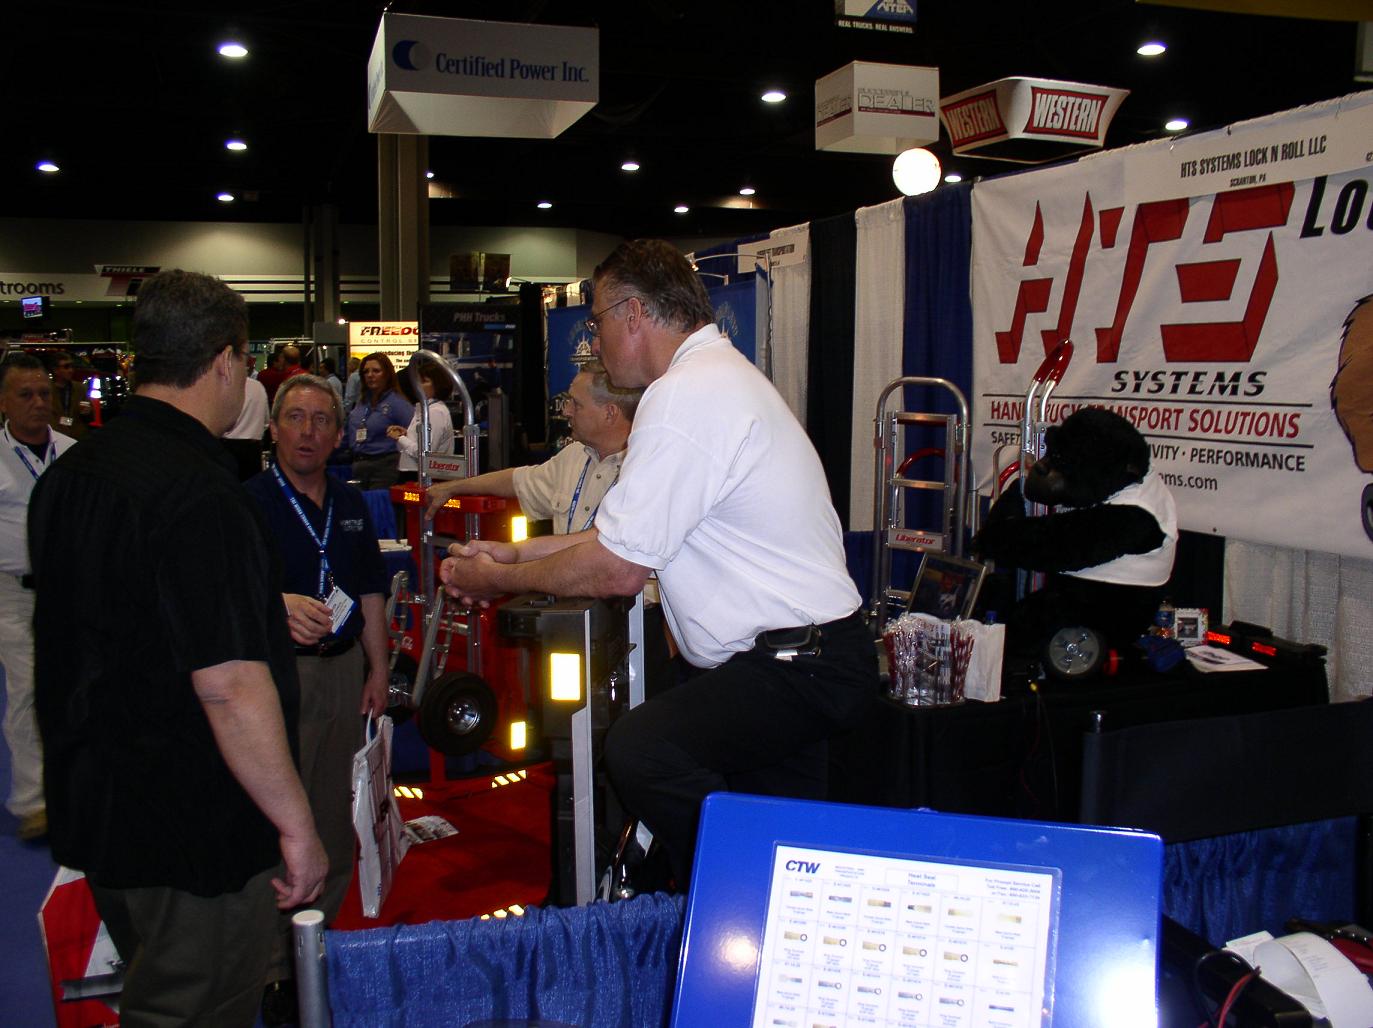 Mike Vacendak and Gary Marcho demonstrate the HTS Ultra-Rack